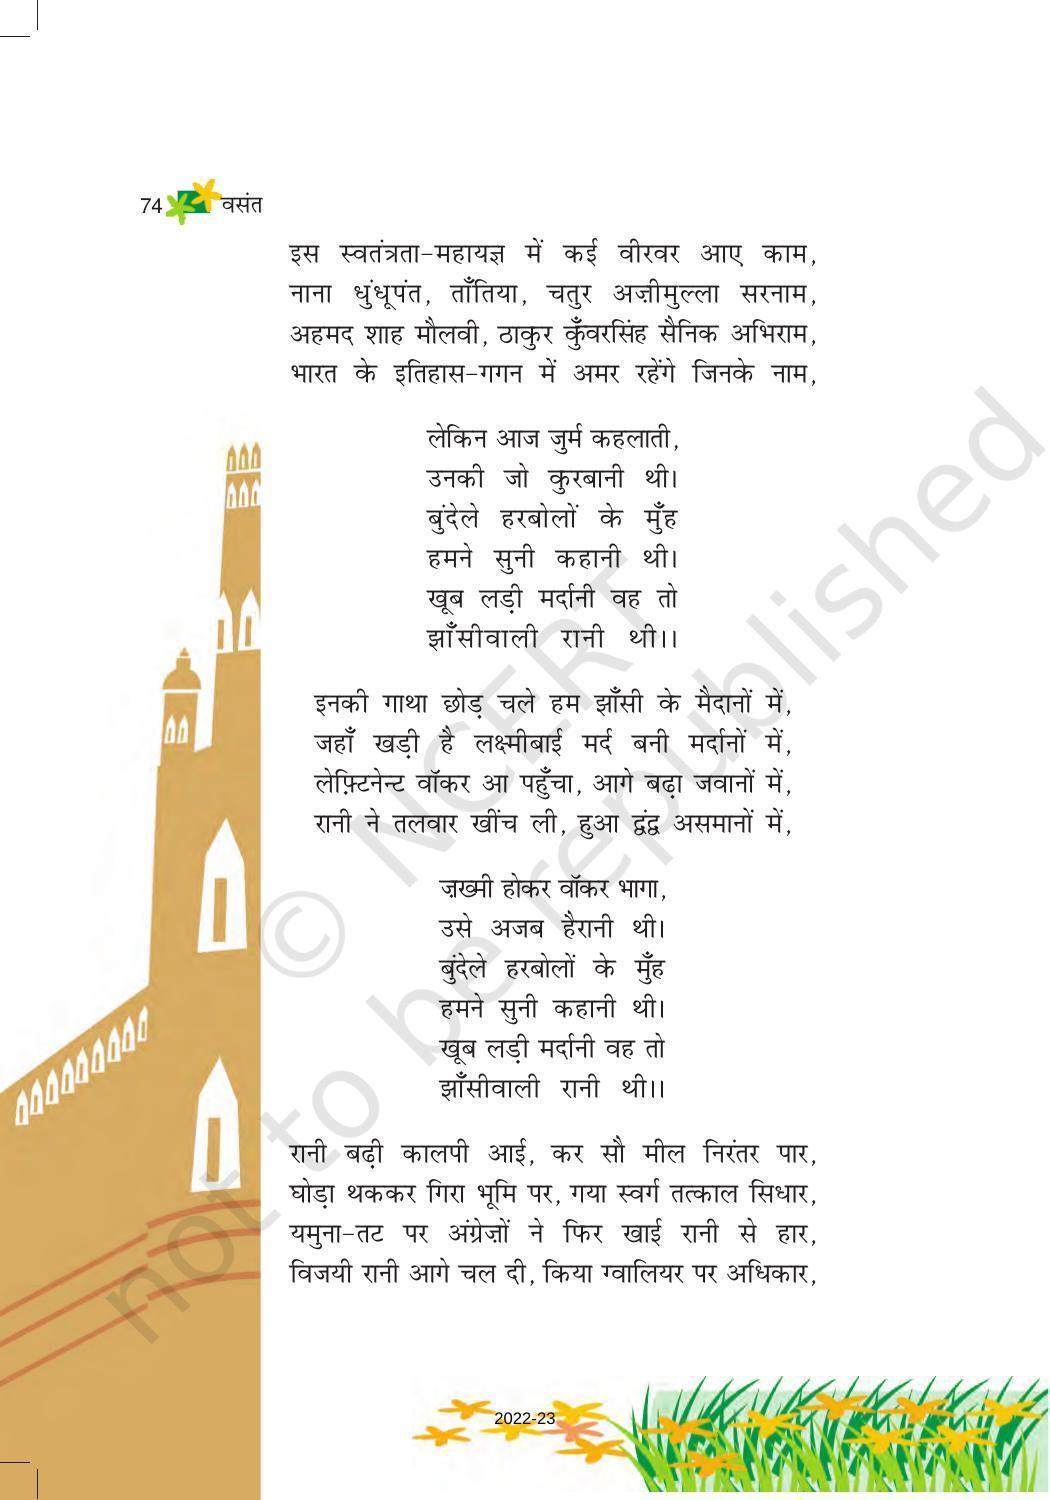 NCERT Book for Class 6 Hindi(Vasant Bhag 1) : Chapter 10-झांसी की रानी - Page 6